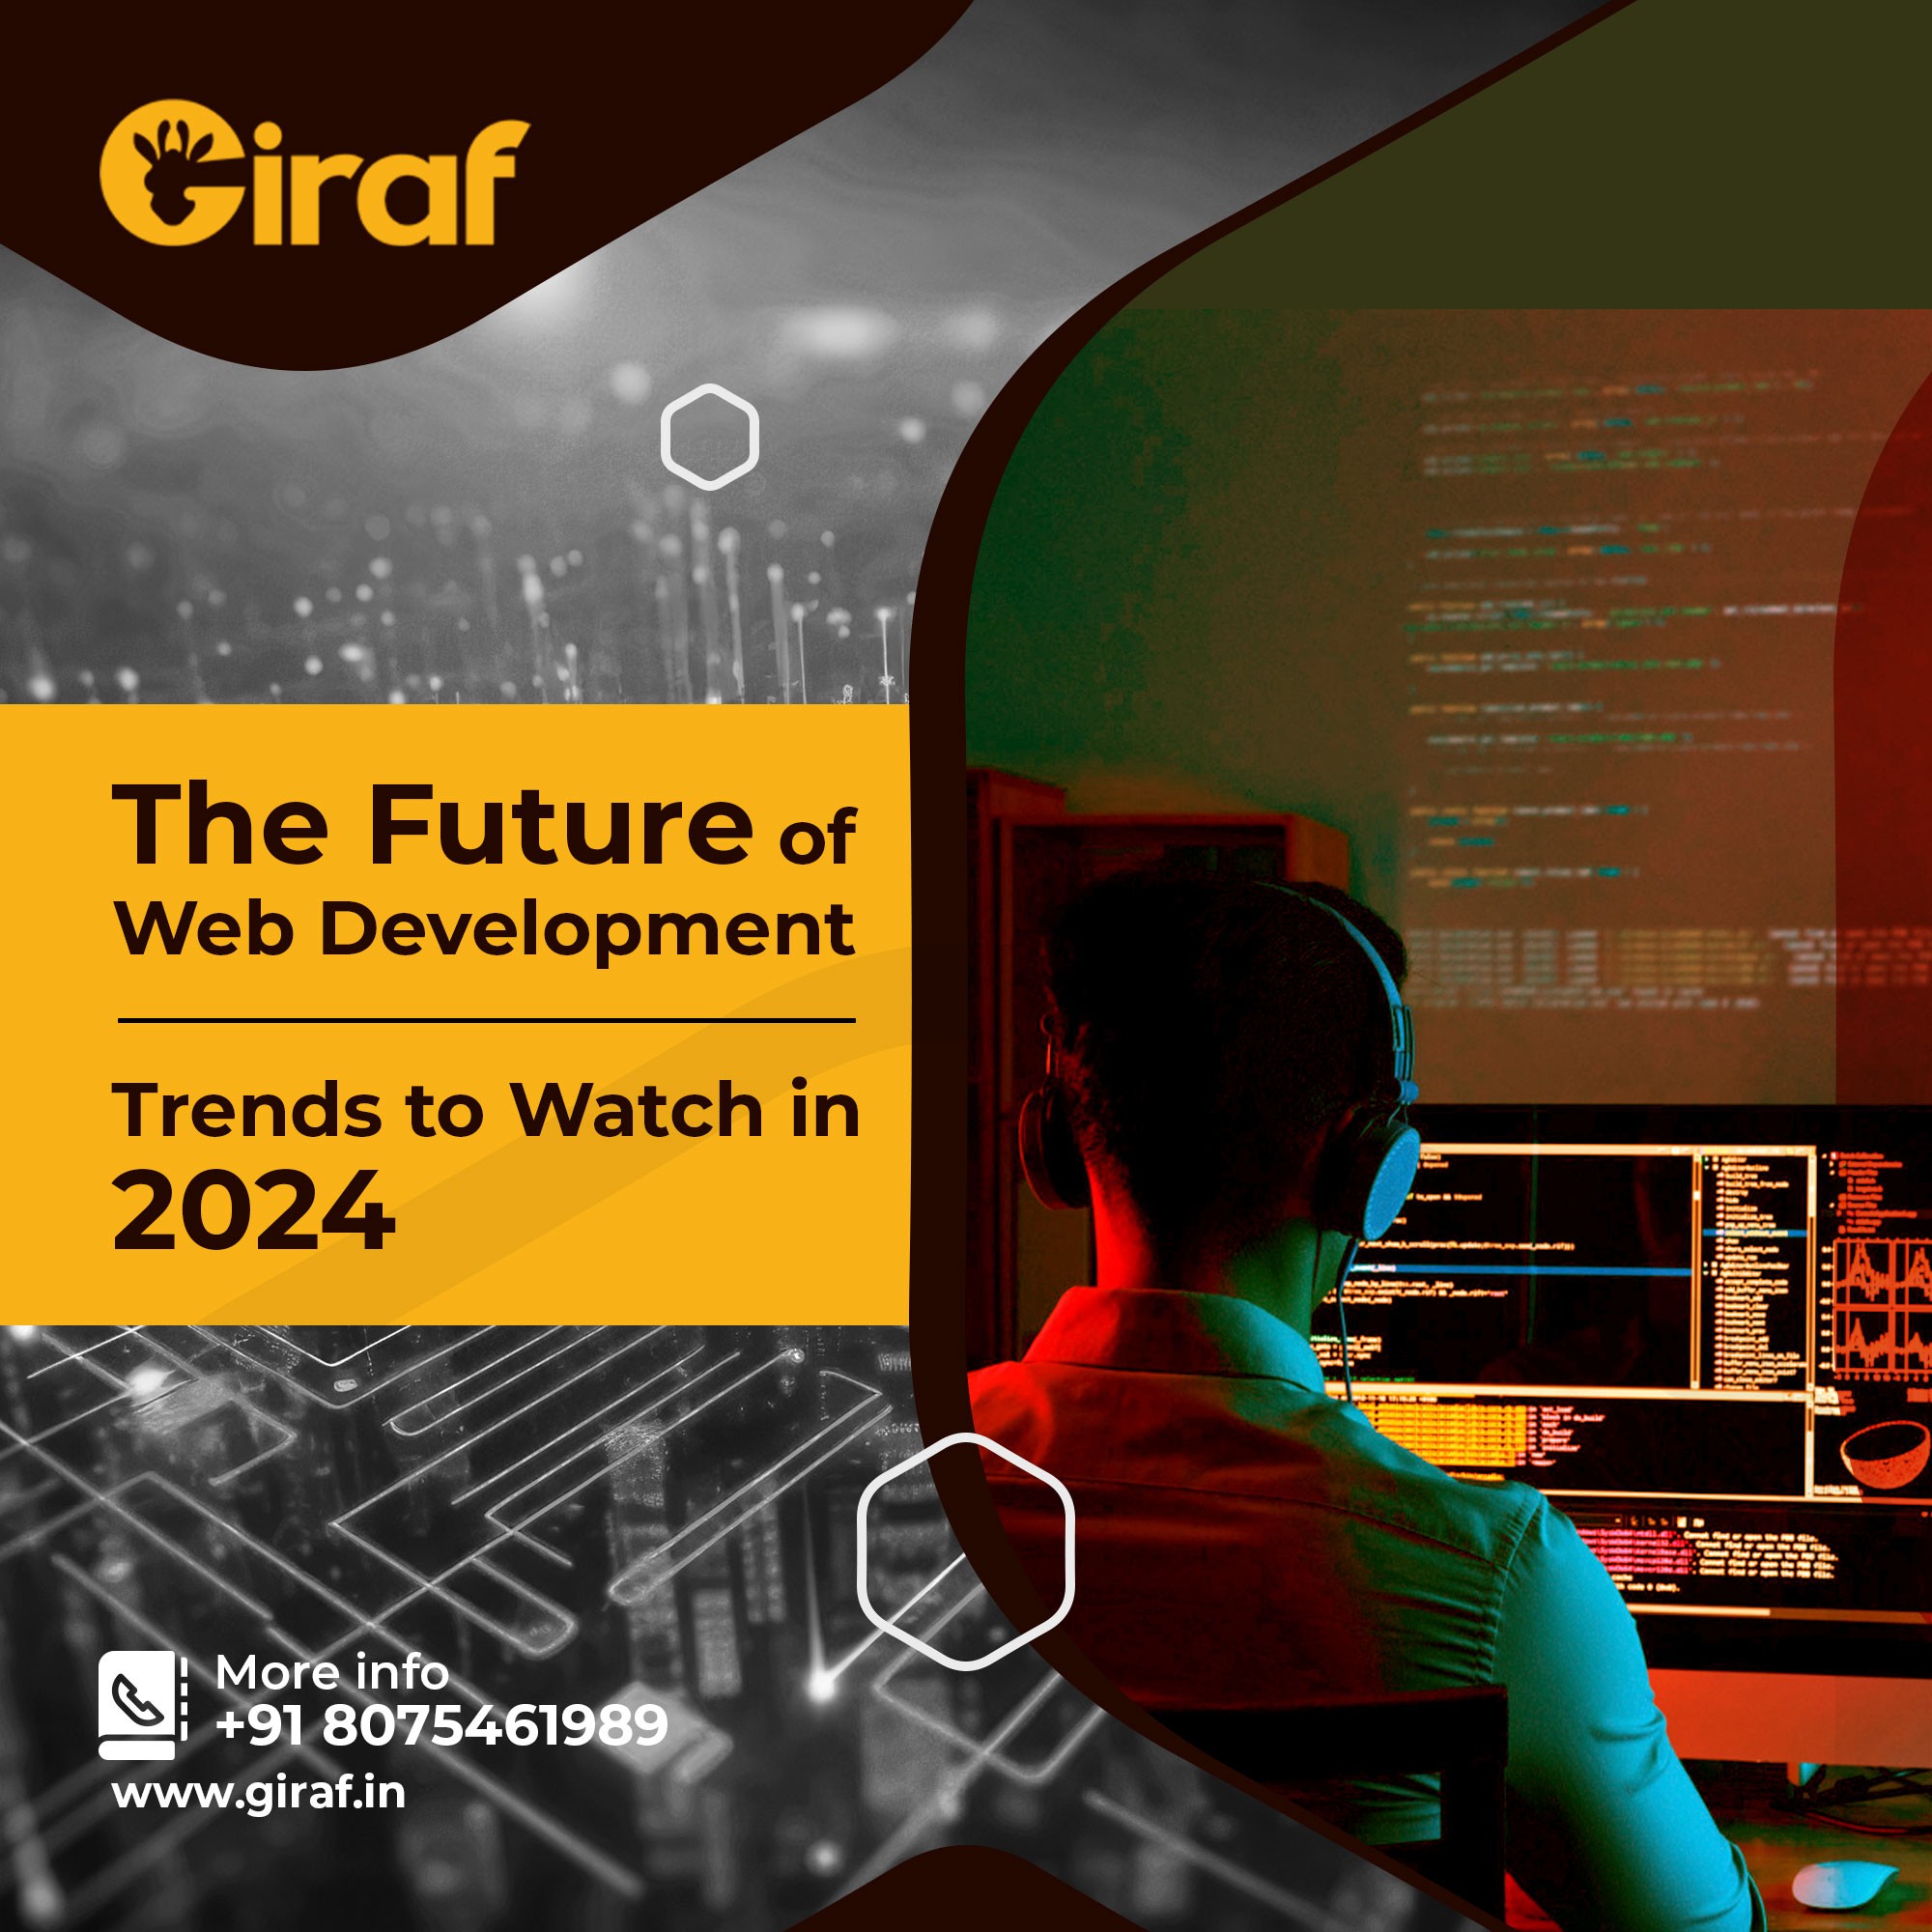 The Future of Web Development: Trends to Watch in 2024